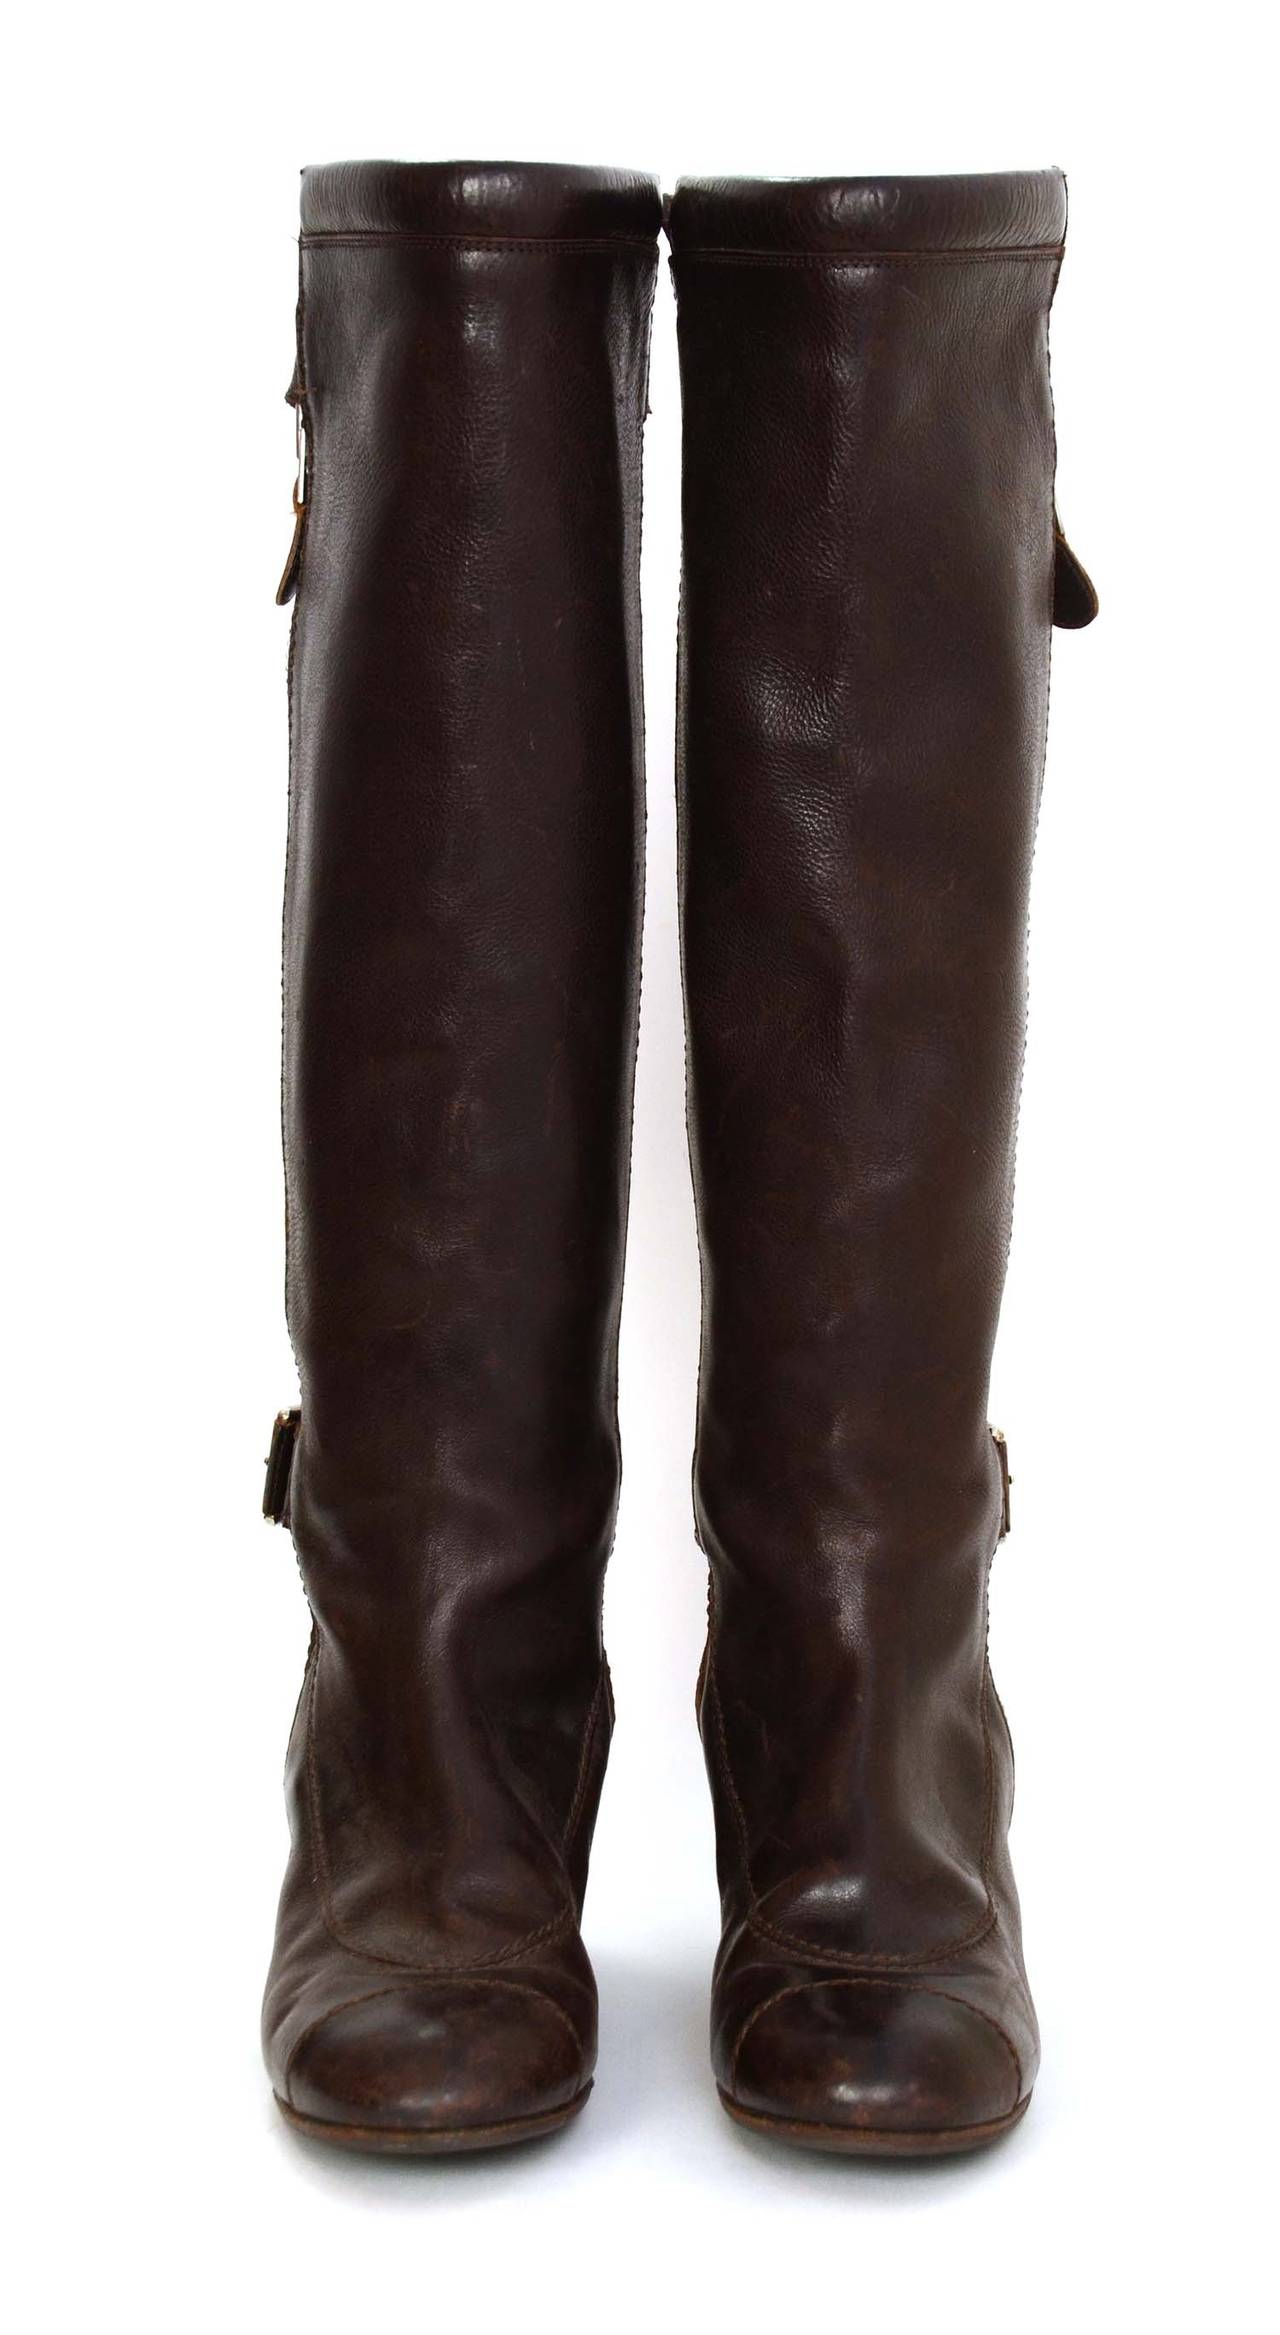 Chanel Brown Leather Riding Boots
Features double buckle, exposed side zipper and leather embossed CC on heel

    Made in: Italy
    Color: Brown
    Composition: Leather and metal
    Sole Stamp: Made in Italy 38
    Closure/opening: Side